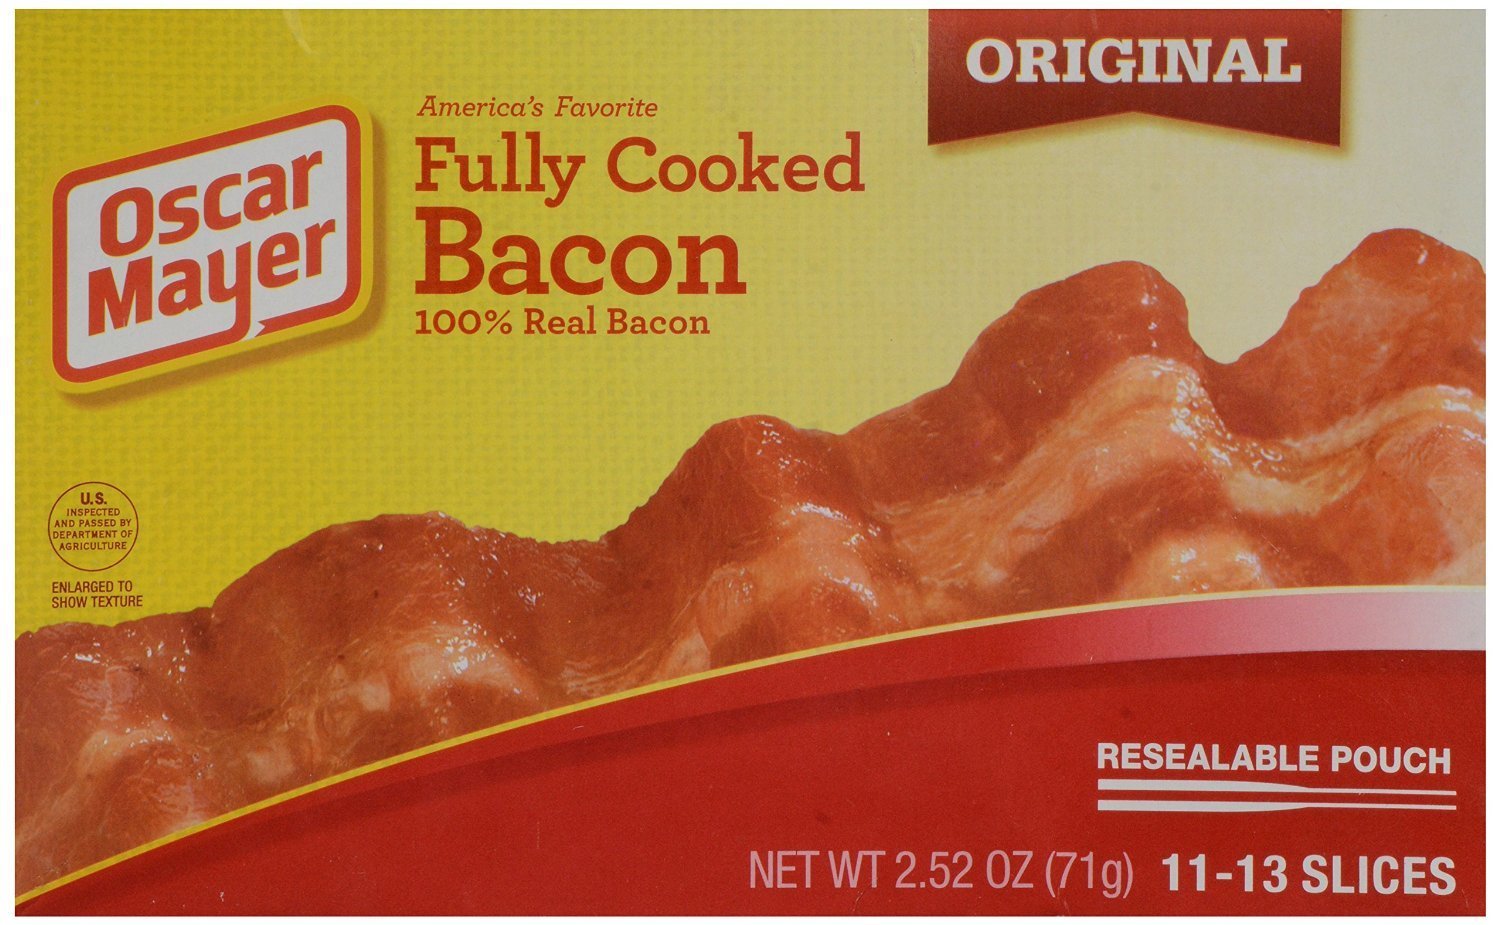 The 5 Emotional Stages of Oscar Meyer Ready to Serve Bacon